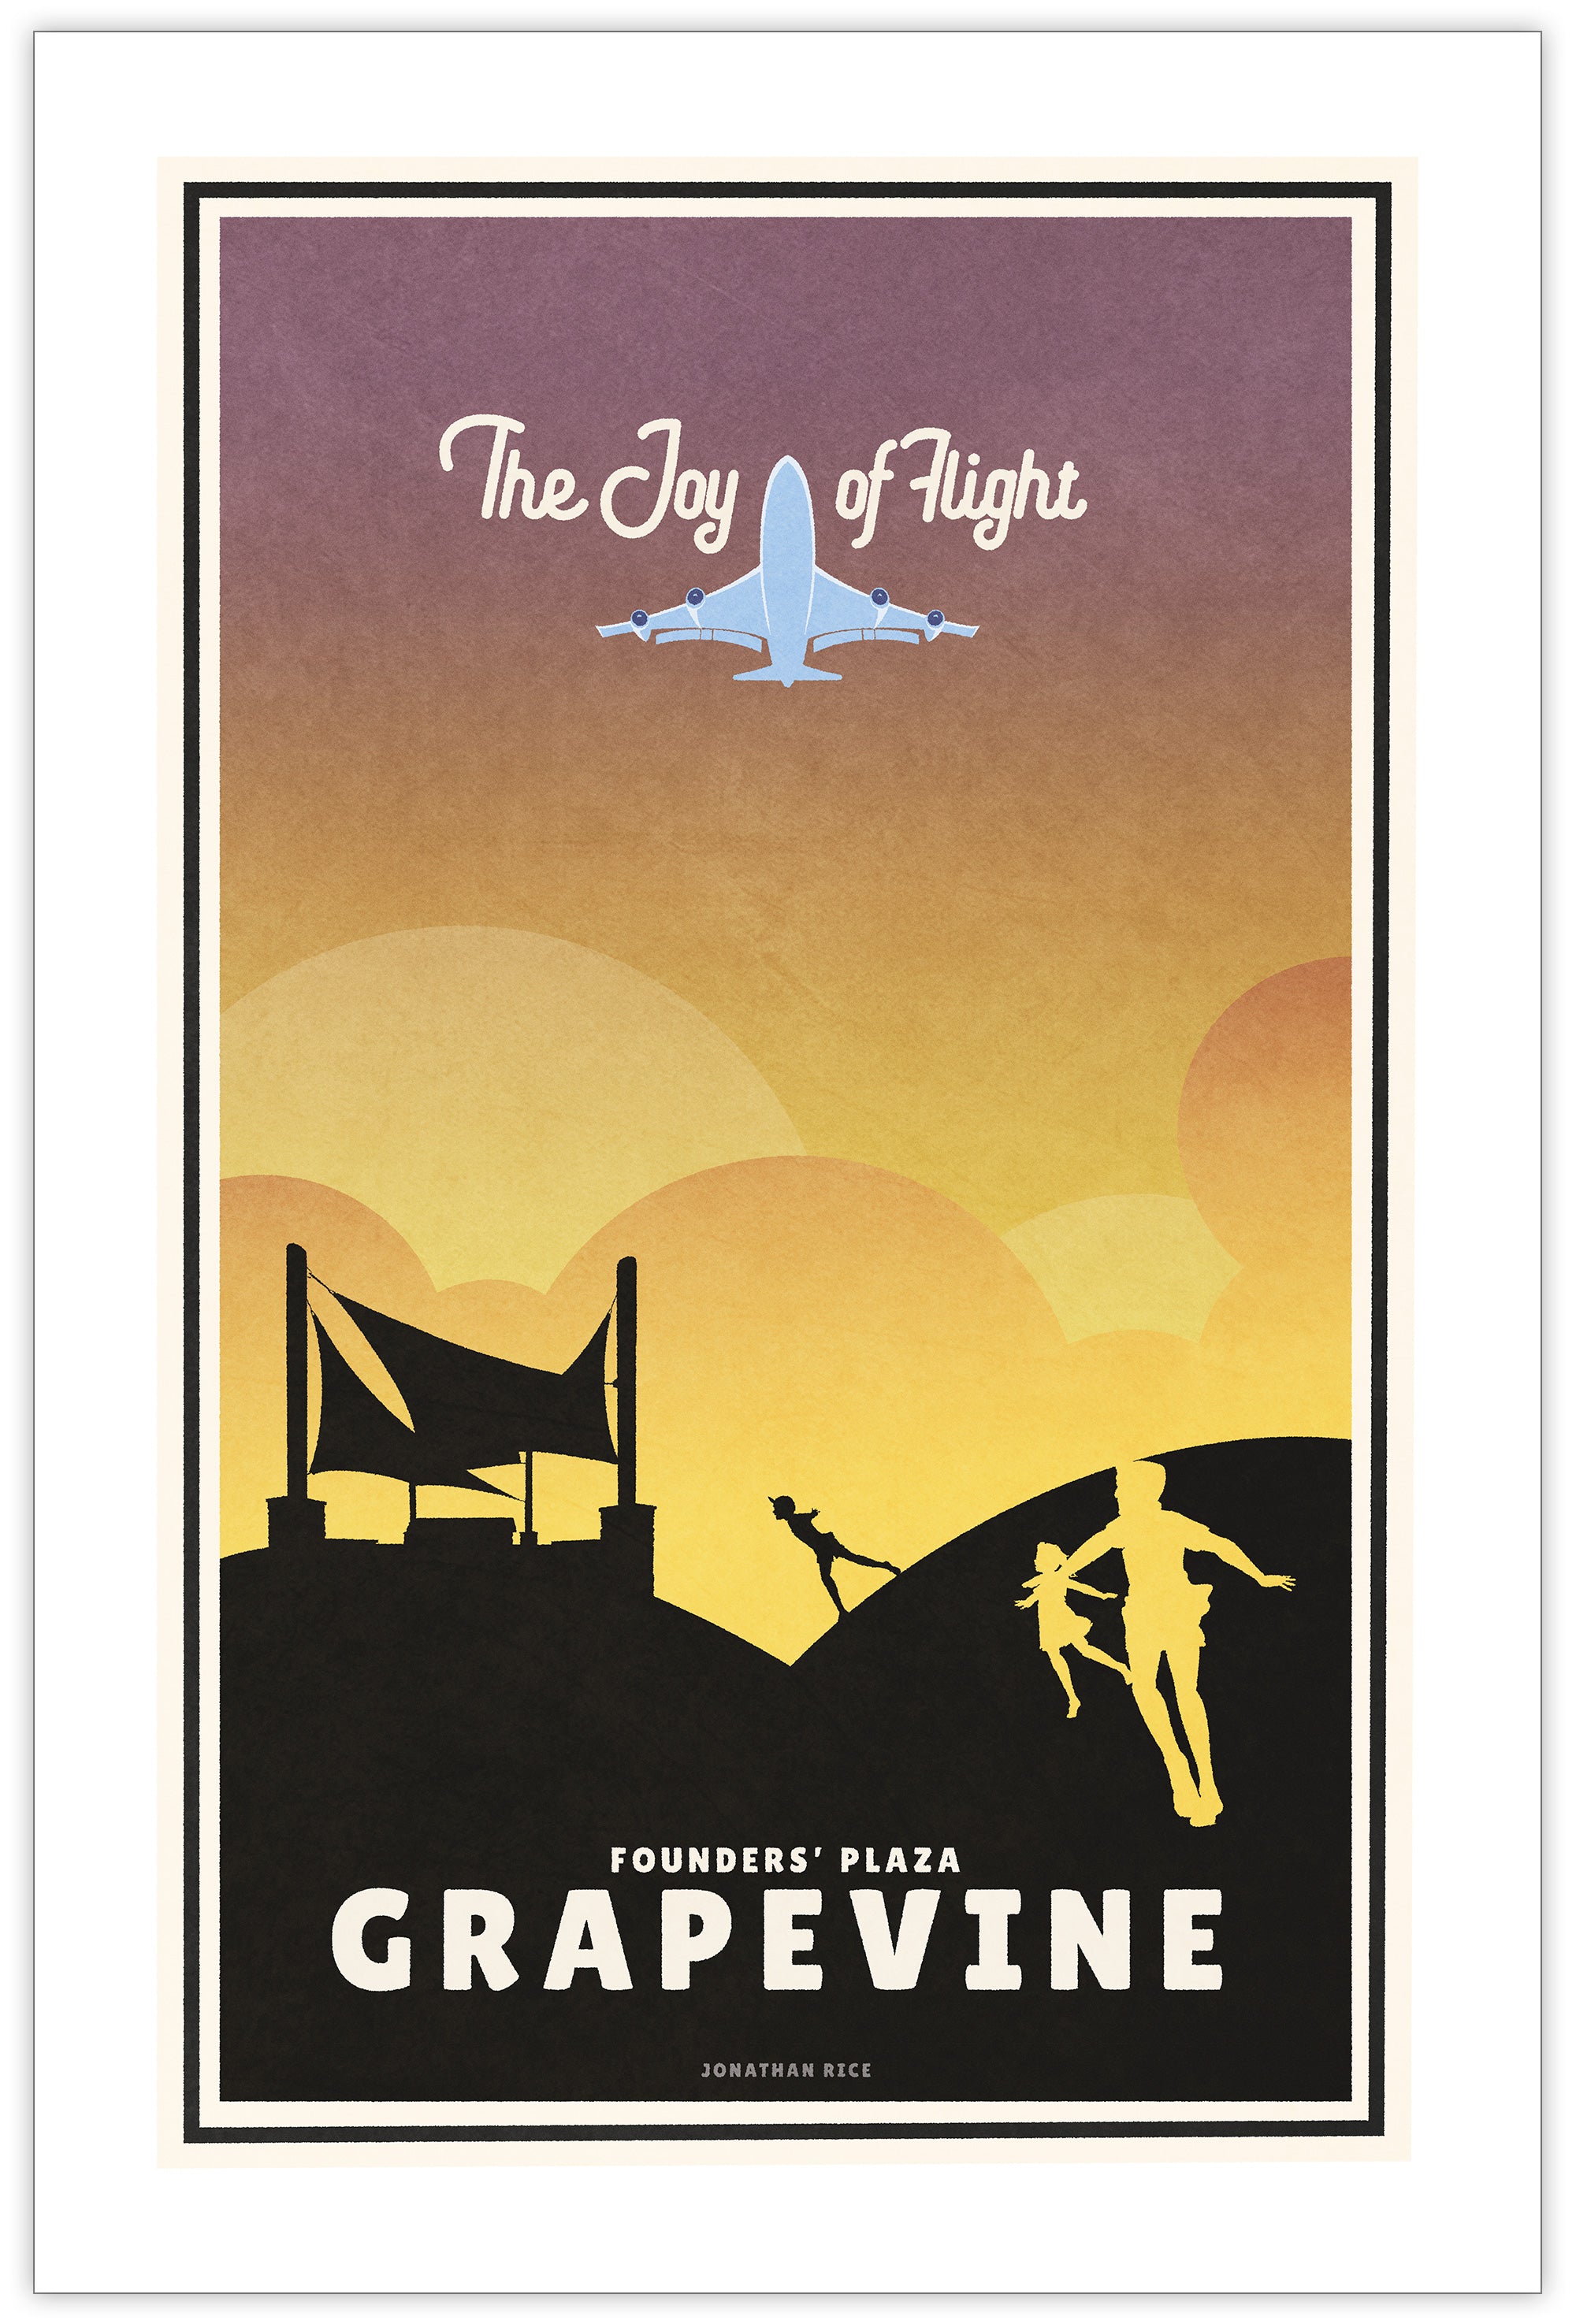 A retro style poster of DFW Airport’s observation area with children playing and an airplane flying overhead. It has the words “The Joy of Flight” at the top. The print primarily in bold black with bright colors. There are additional words a the bottom that says “Founders’ Plaza, Grapevine”.